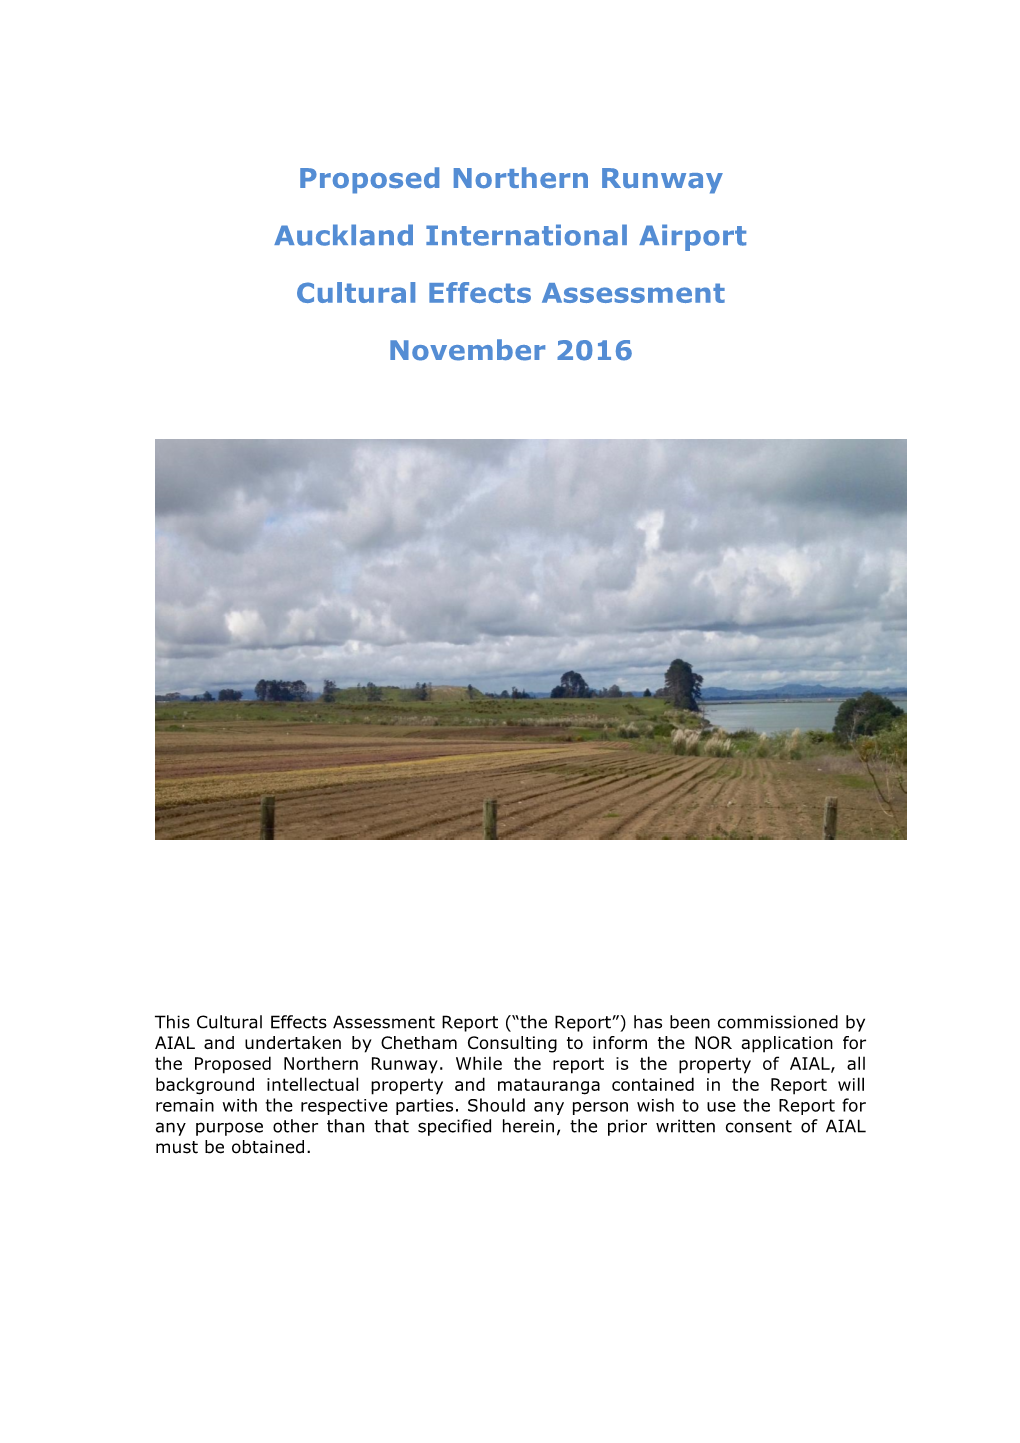 Proposed Northern Runway Auckland International Airport Cultural Effects